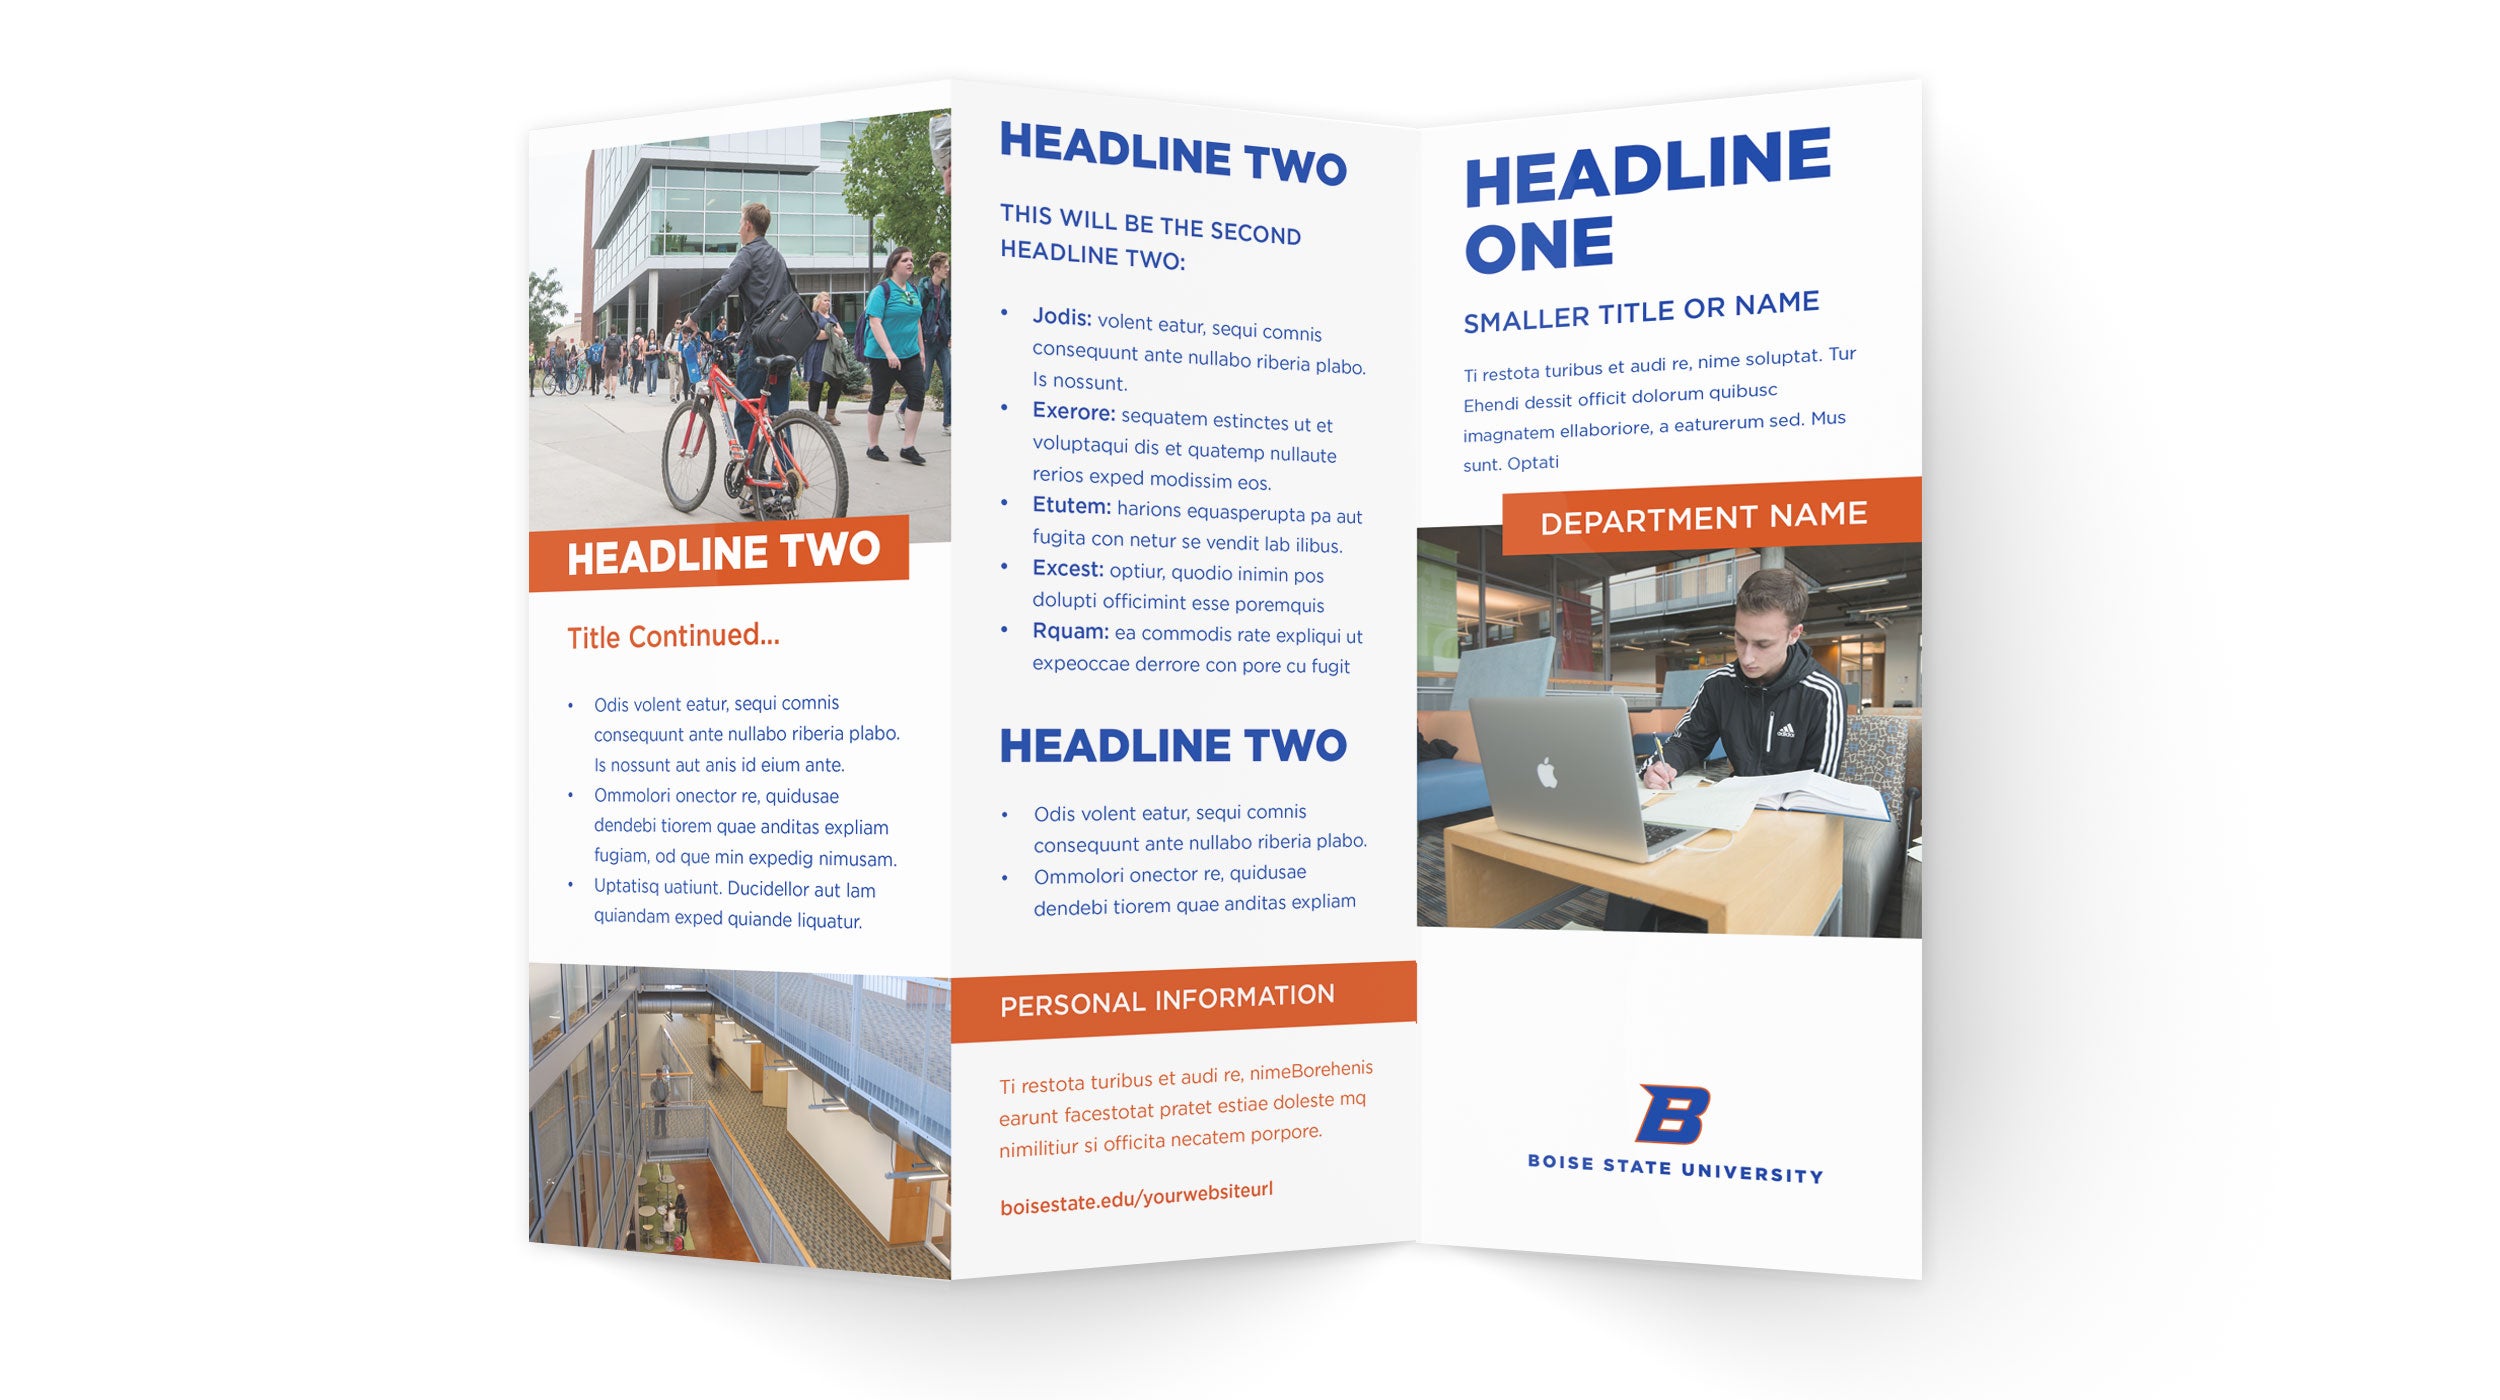 Examples of Boise State trifold brochure designs